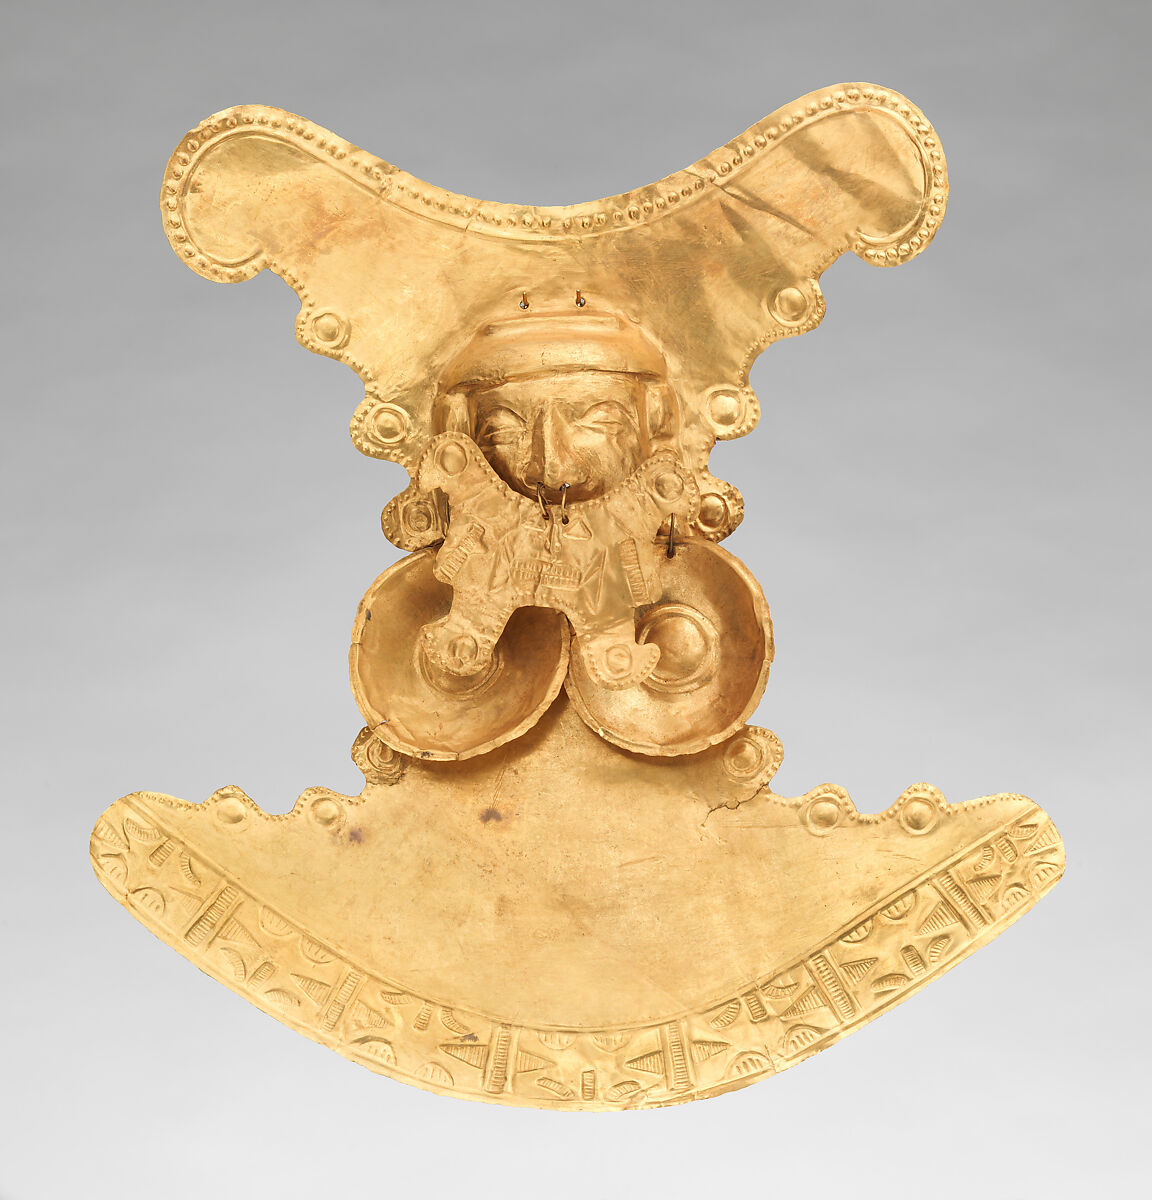 Pectoral with Face, Calima (Yotoco) artist, Gold (hammered), Calima (Yotoco) 